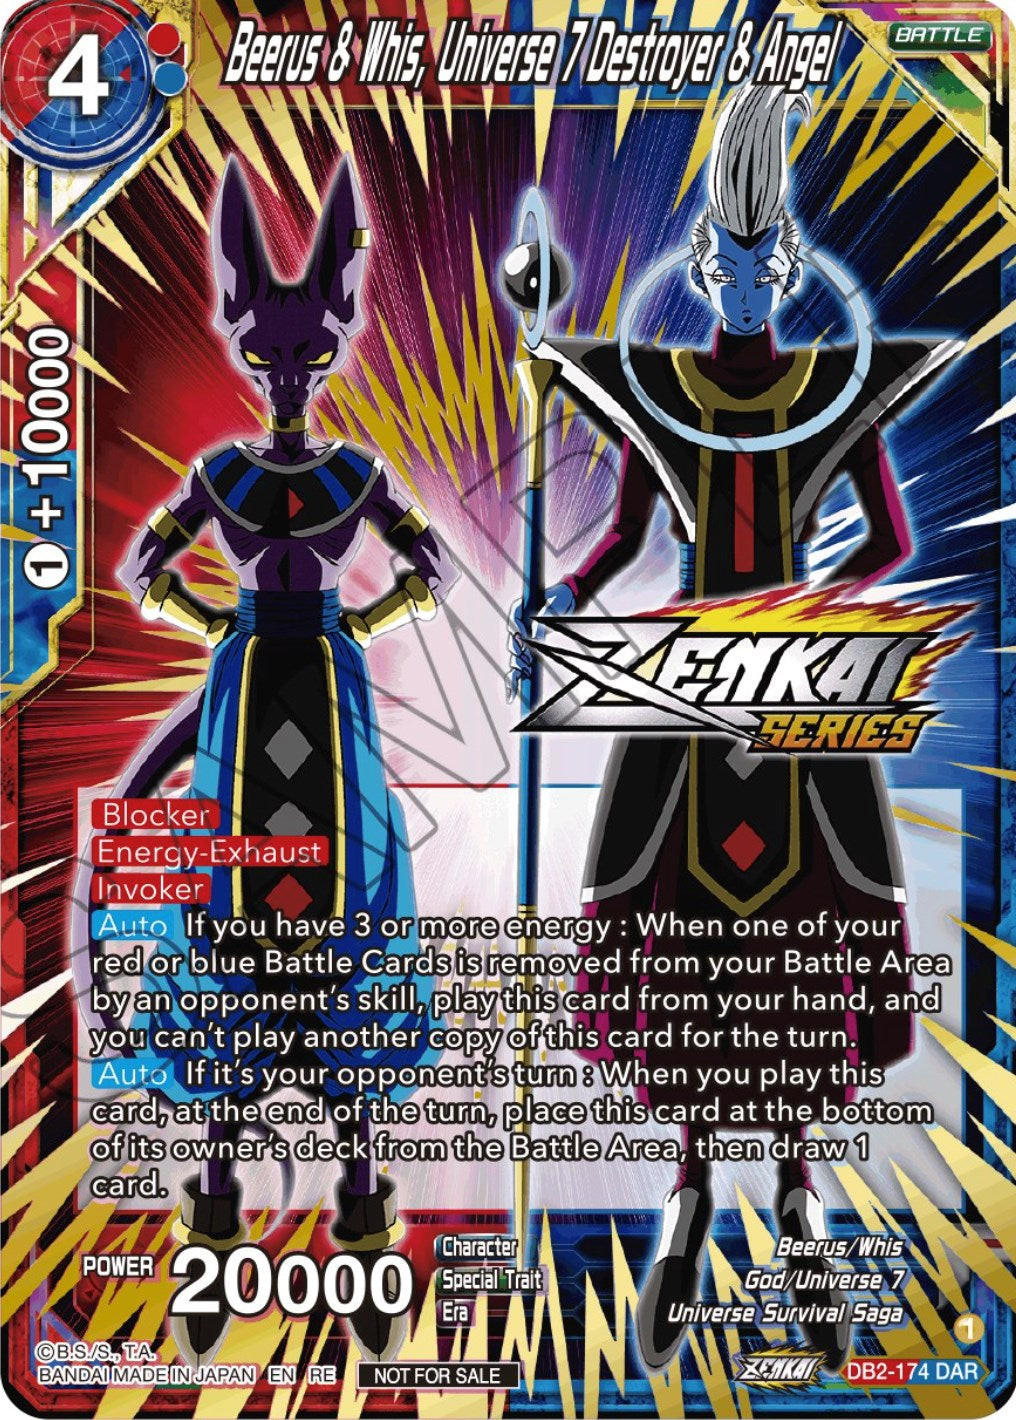 Beerus & Whis, Universe 7 Destroyer & Angel (Event Pack 12) (DB2-174) [Tournament Promotion Cards] | Shuffle n Cut Hobbies & Games